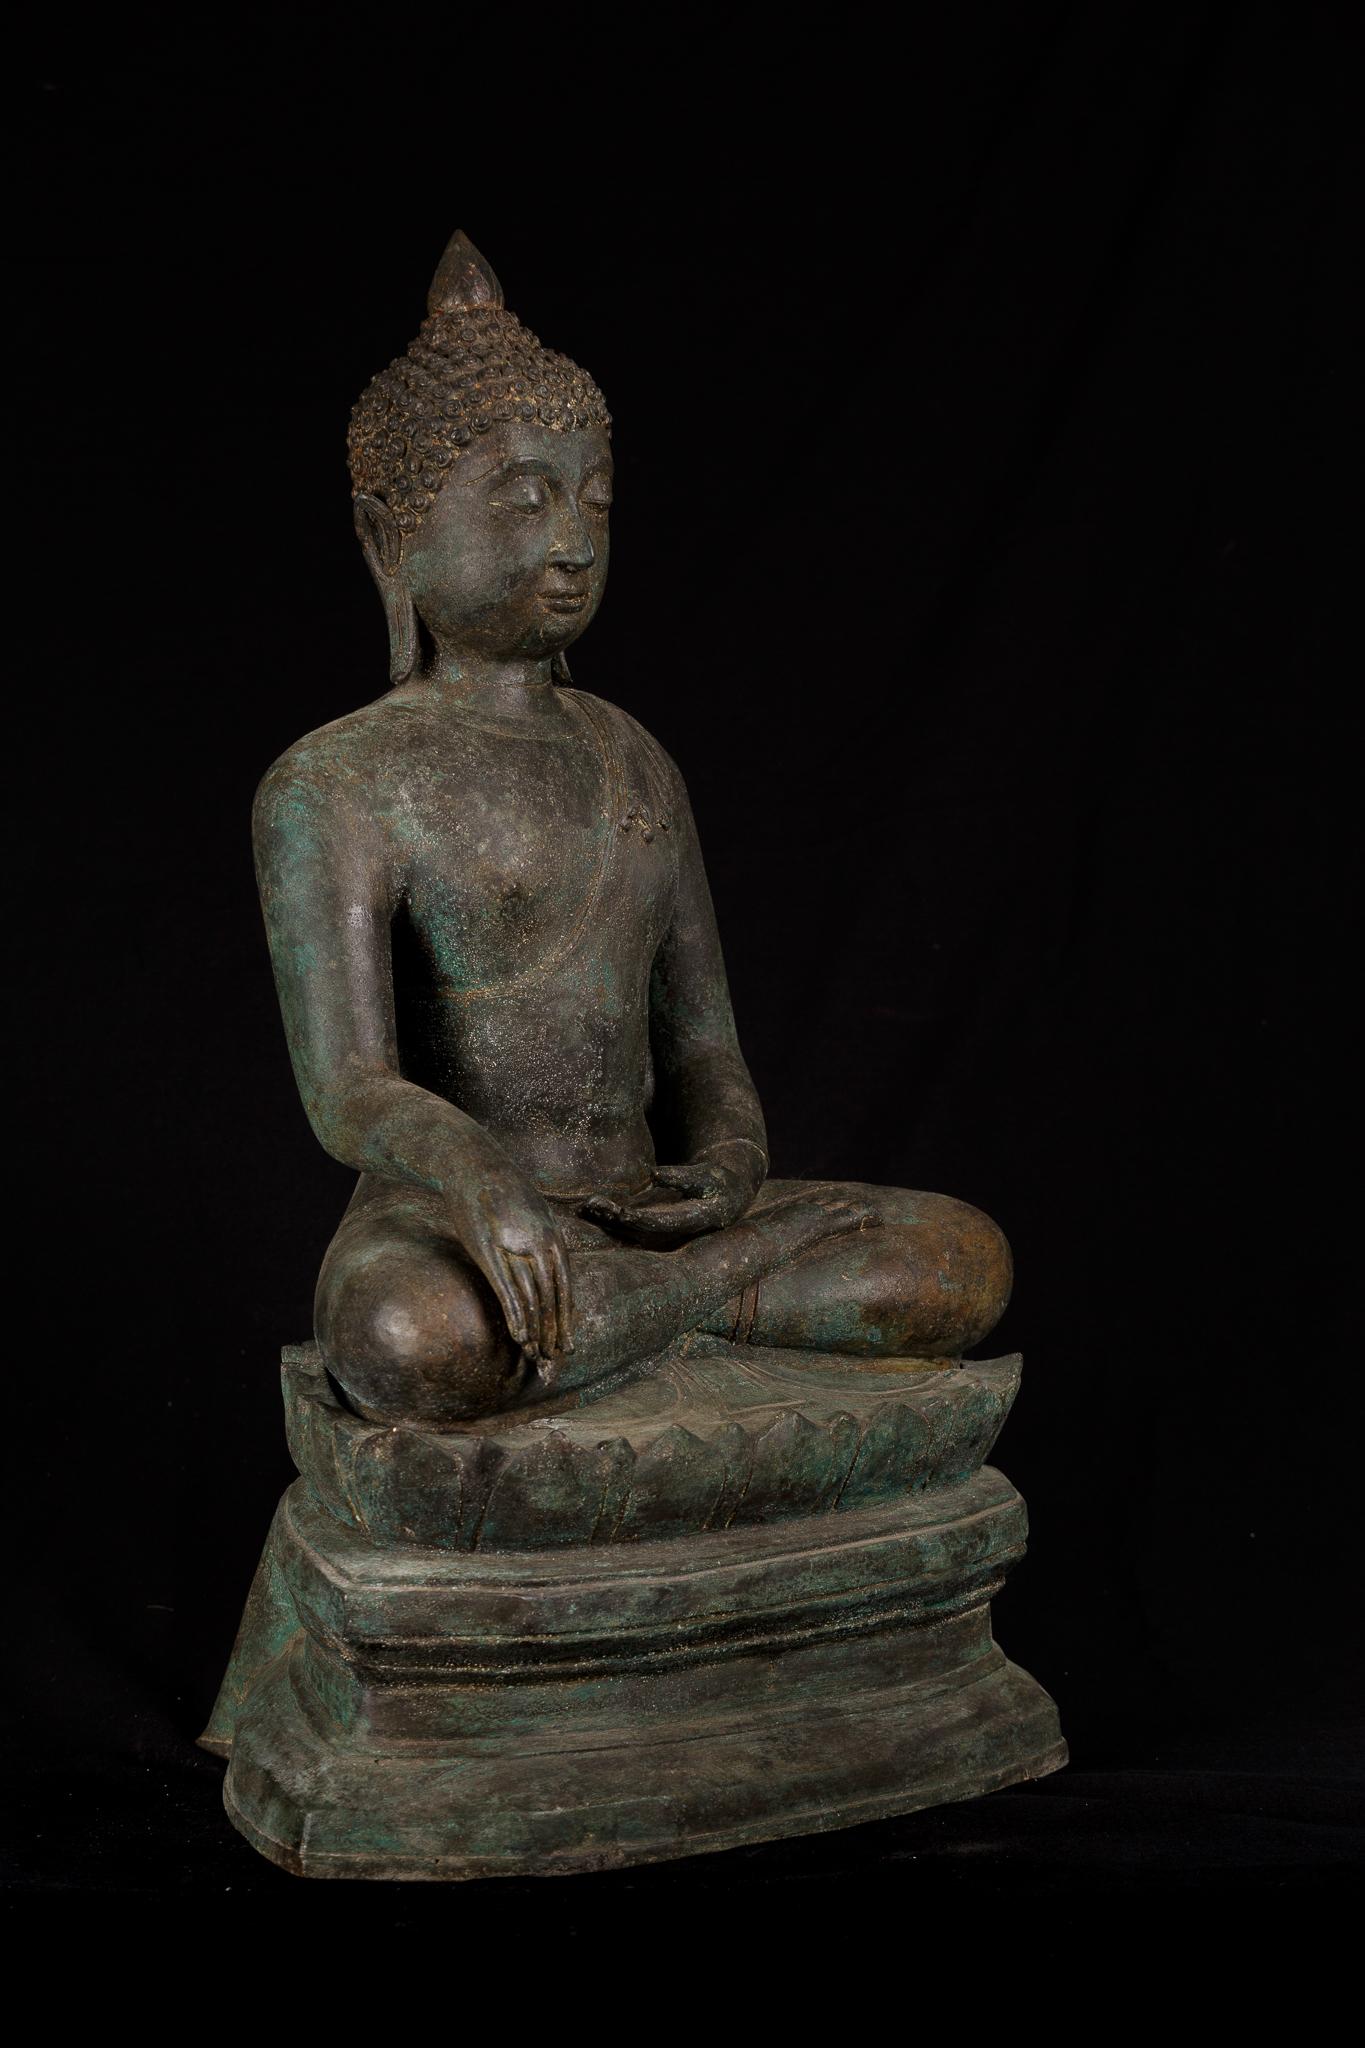 From a fifty year old UK private collection

A large 200 year old bronze Buddha, 18th century, Buddha of Enlightenment 

This beautiful Buddha sculpture will bring serenity and timeless style to your home, office, sacred, or garden space.